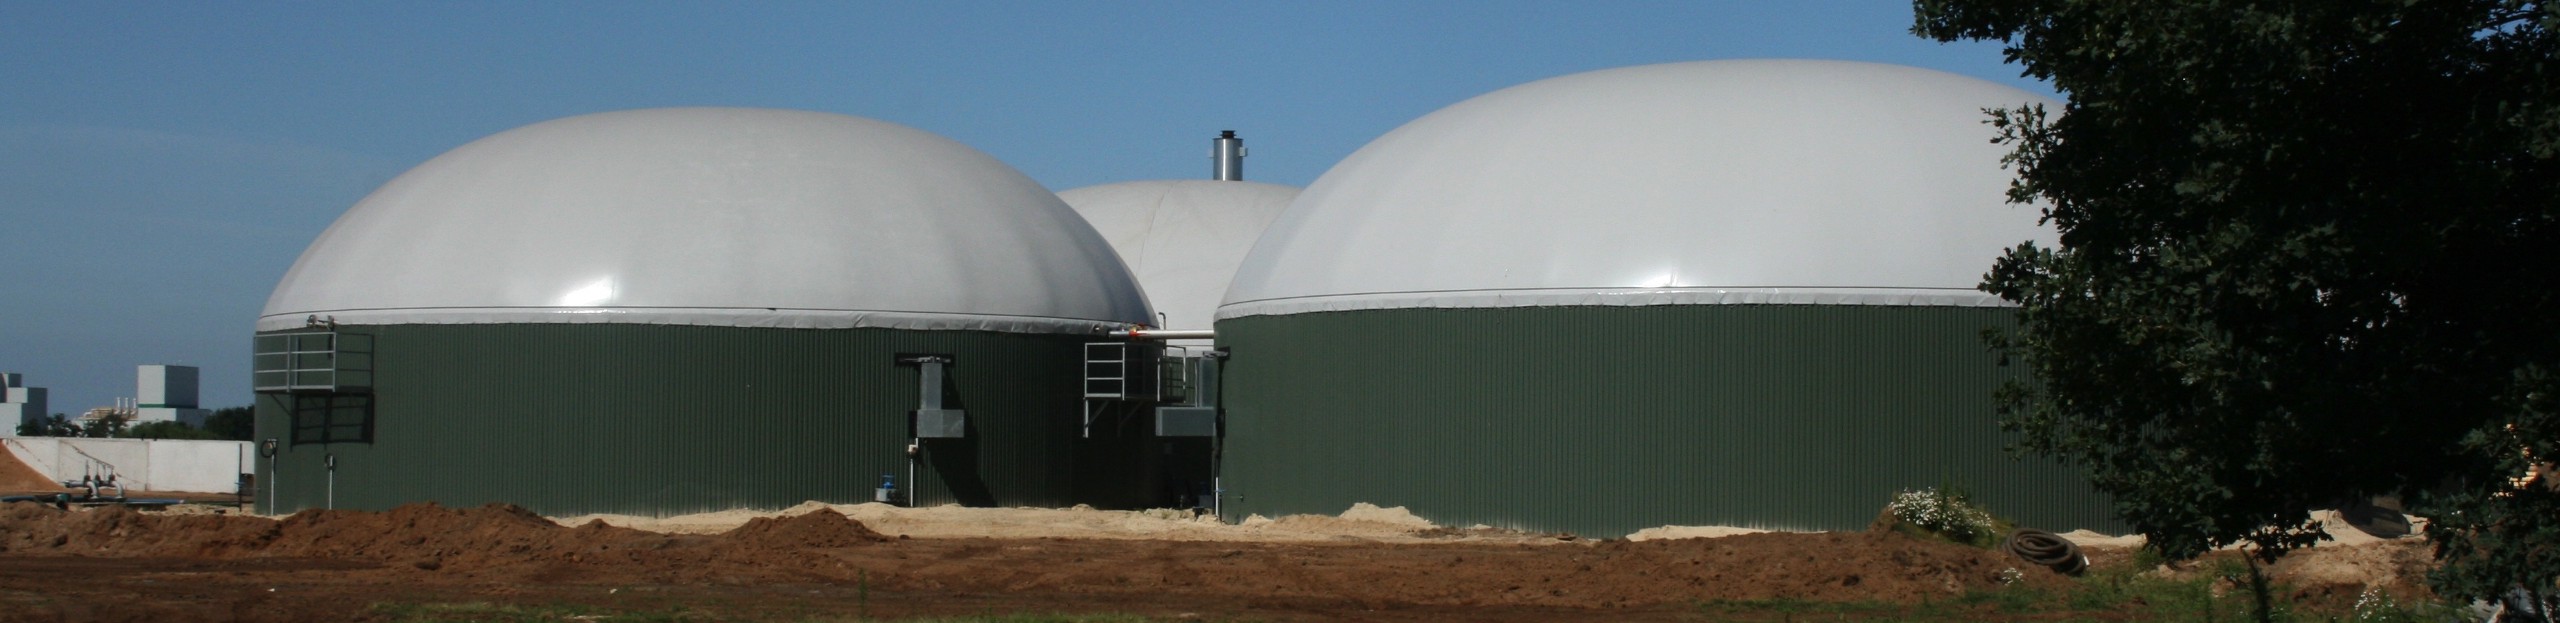 Large circular tanks with dome roofs.